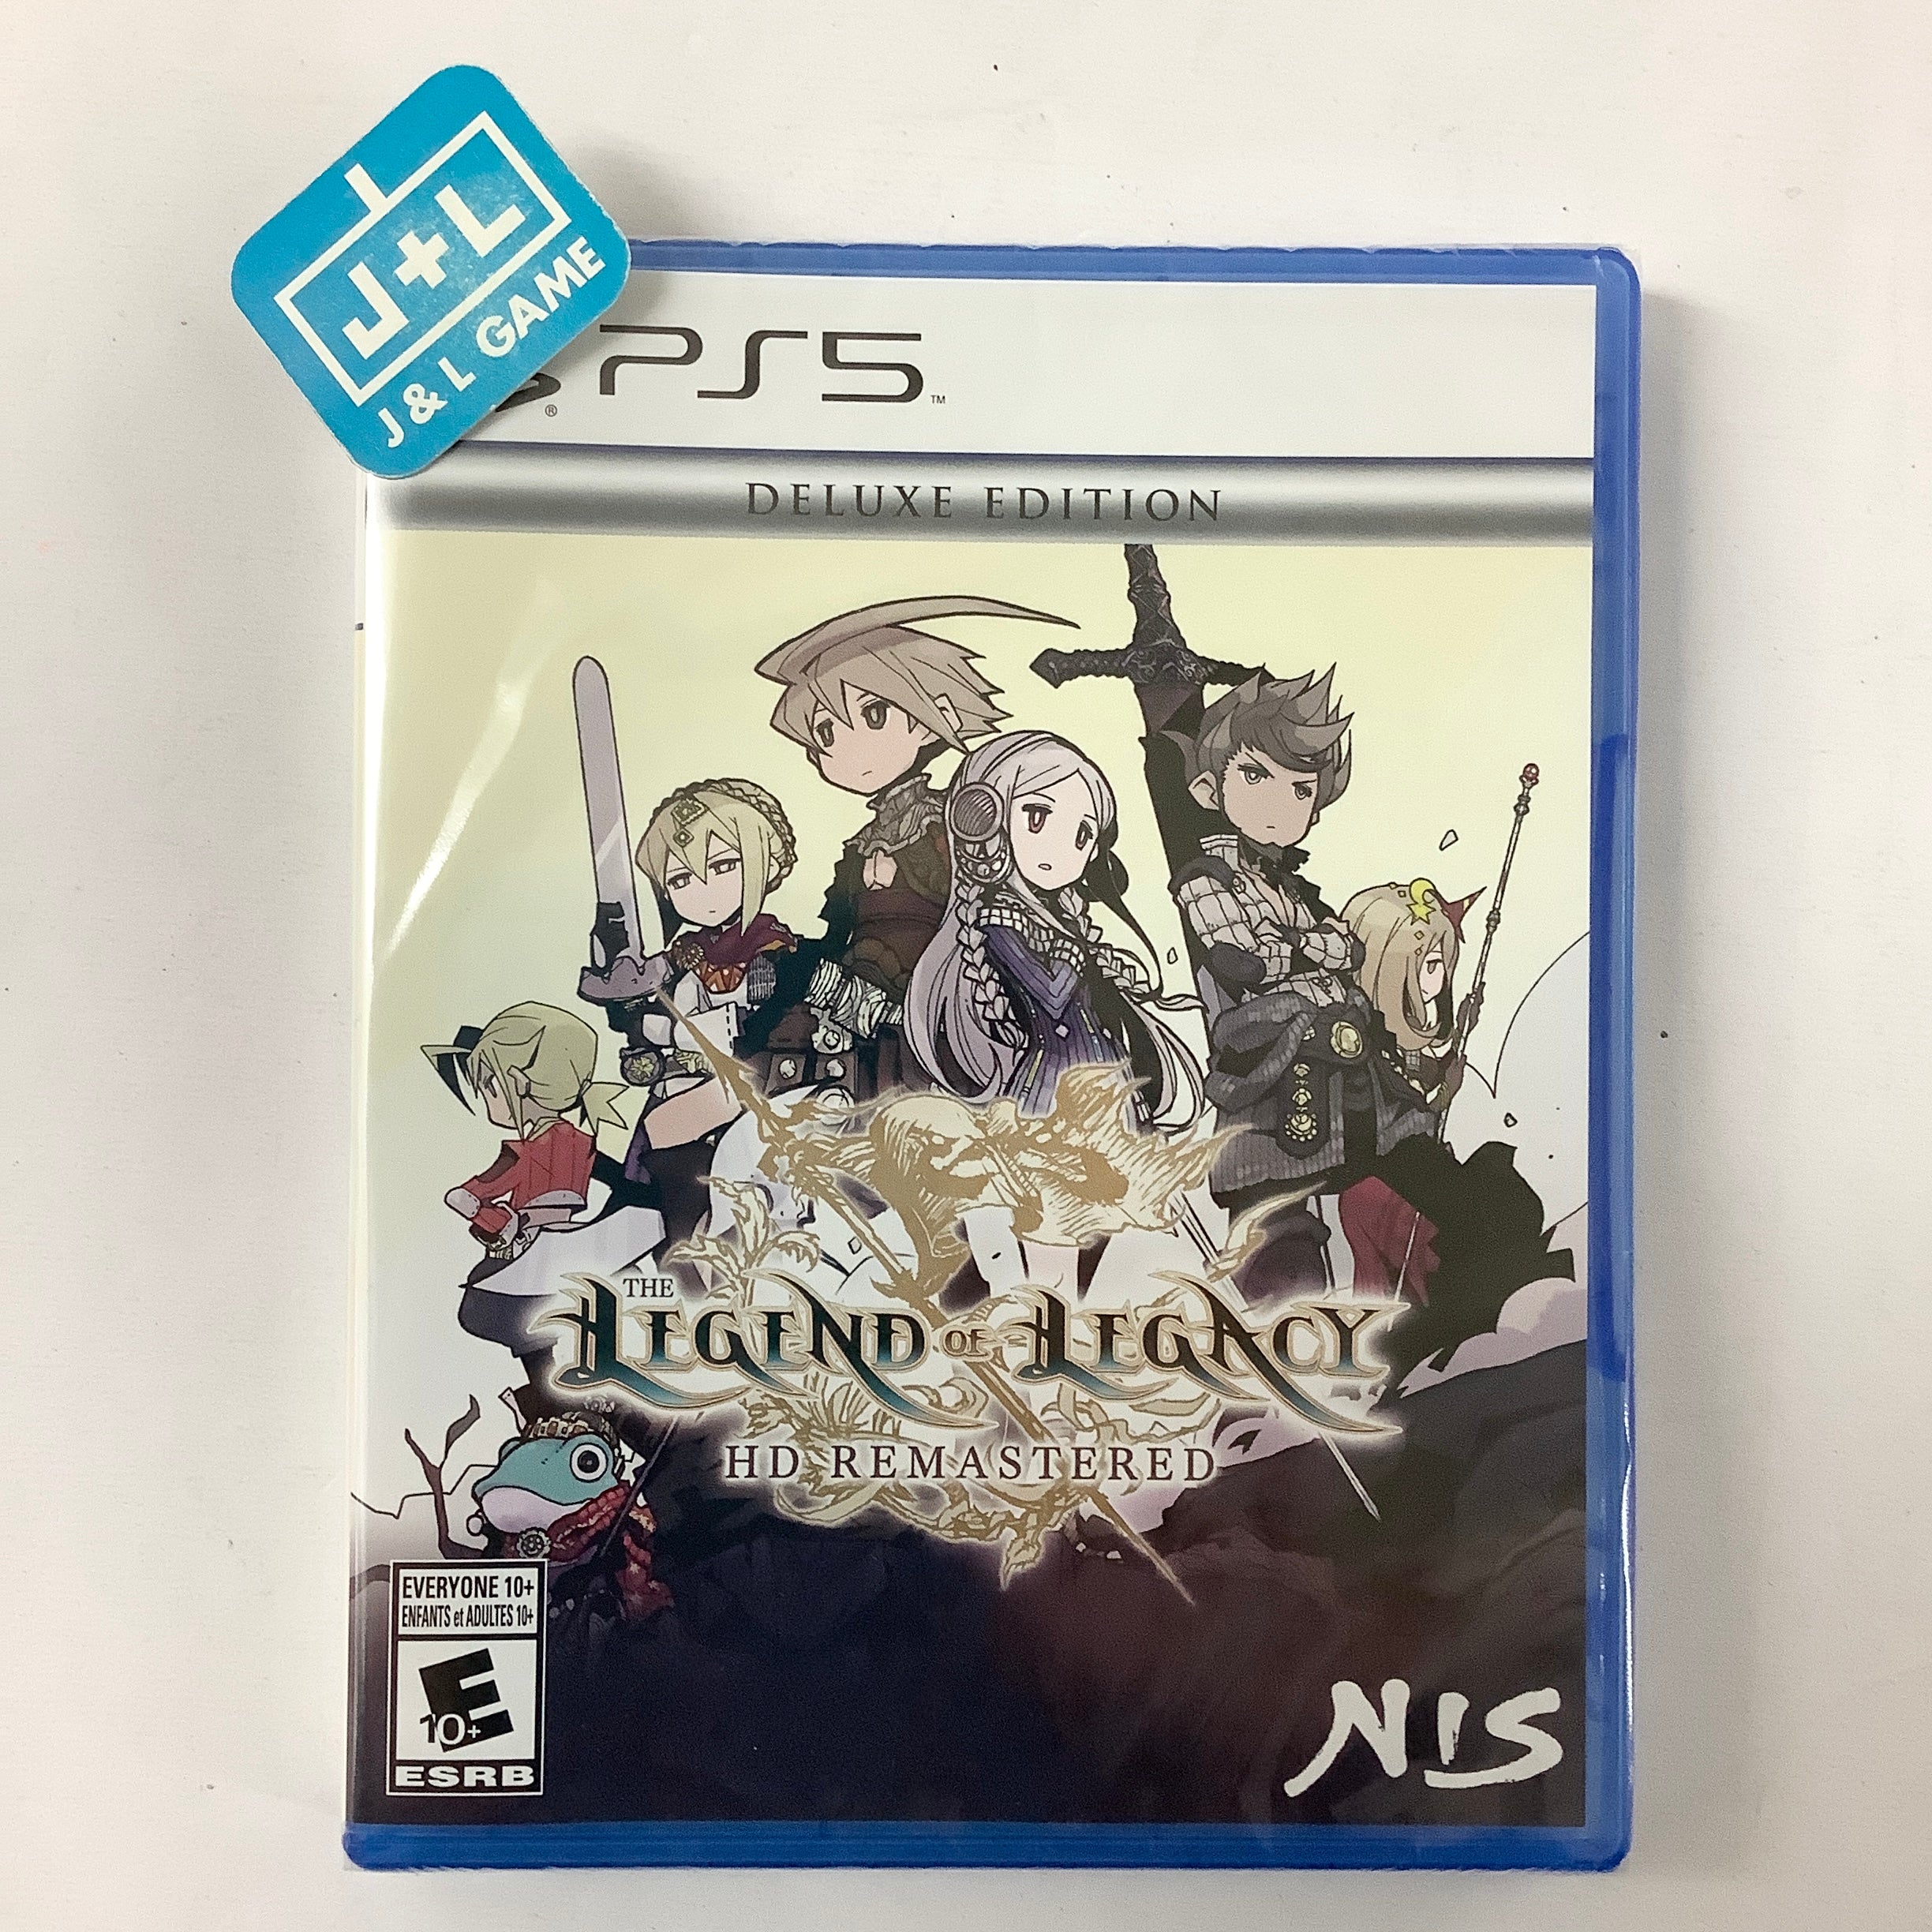 The Legend of Legacy HD Remastered: Deluxe Edition - (PS5) PlayStation 5 Video Games NIS America   